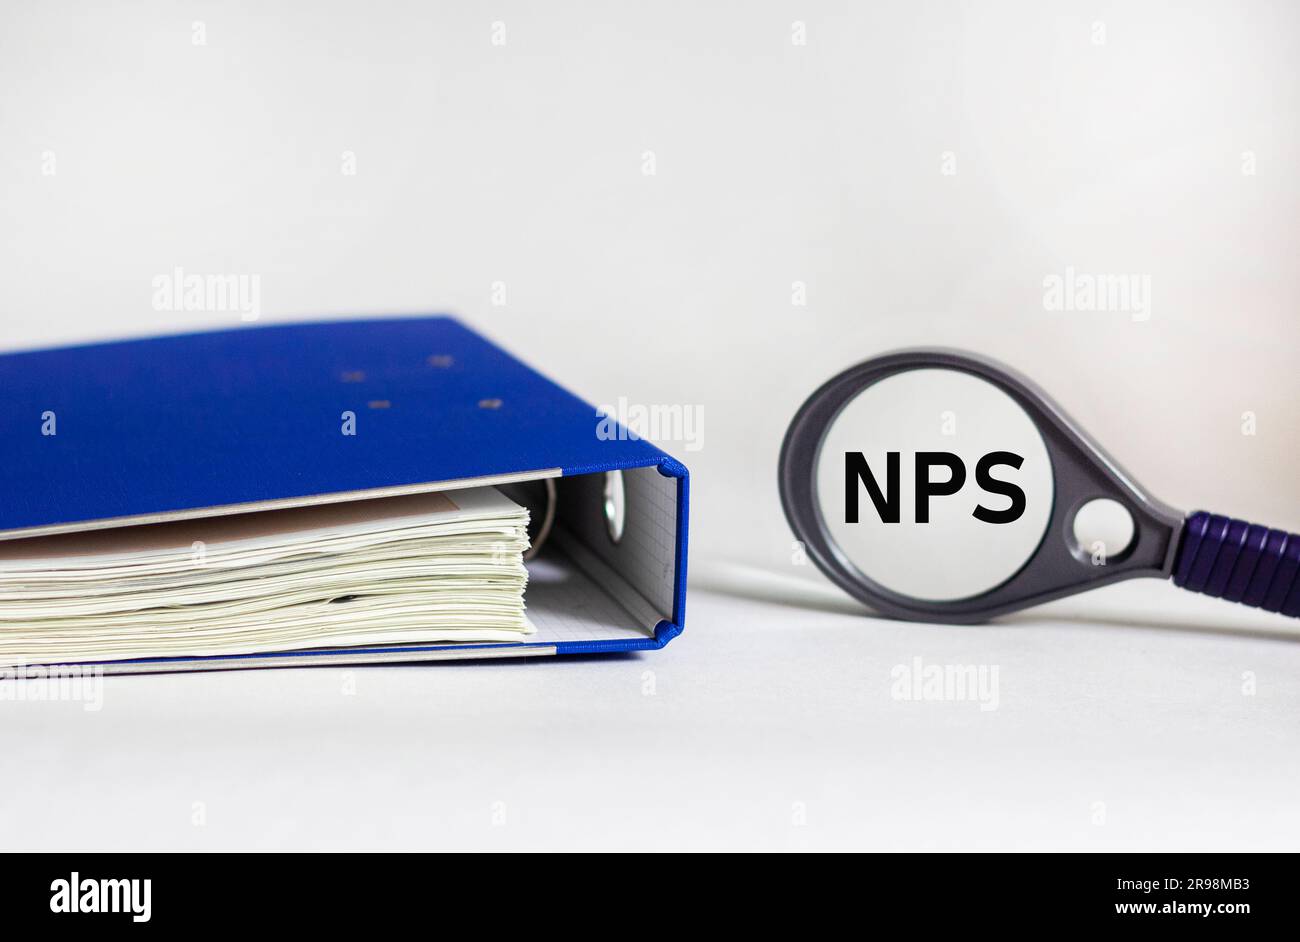 NPS concept on magnifying glass on white background with blue folder Stock Photo